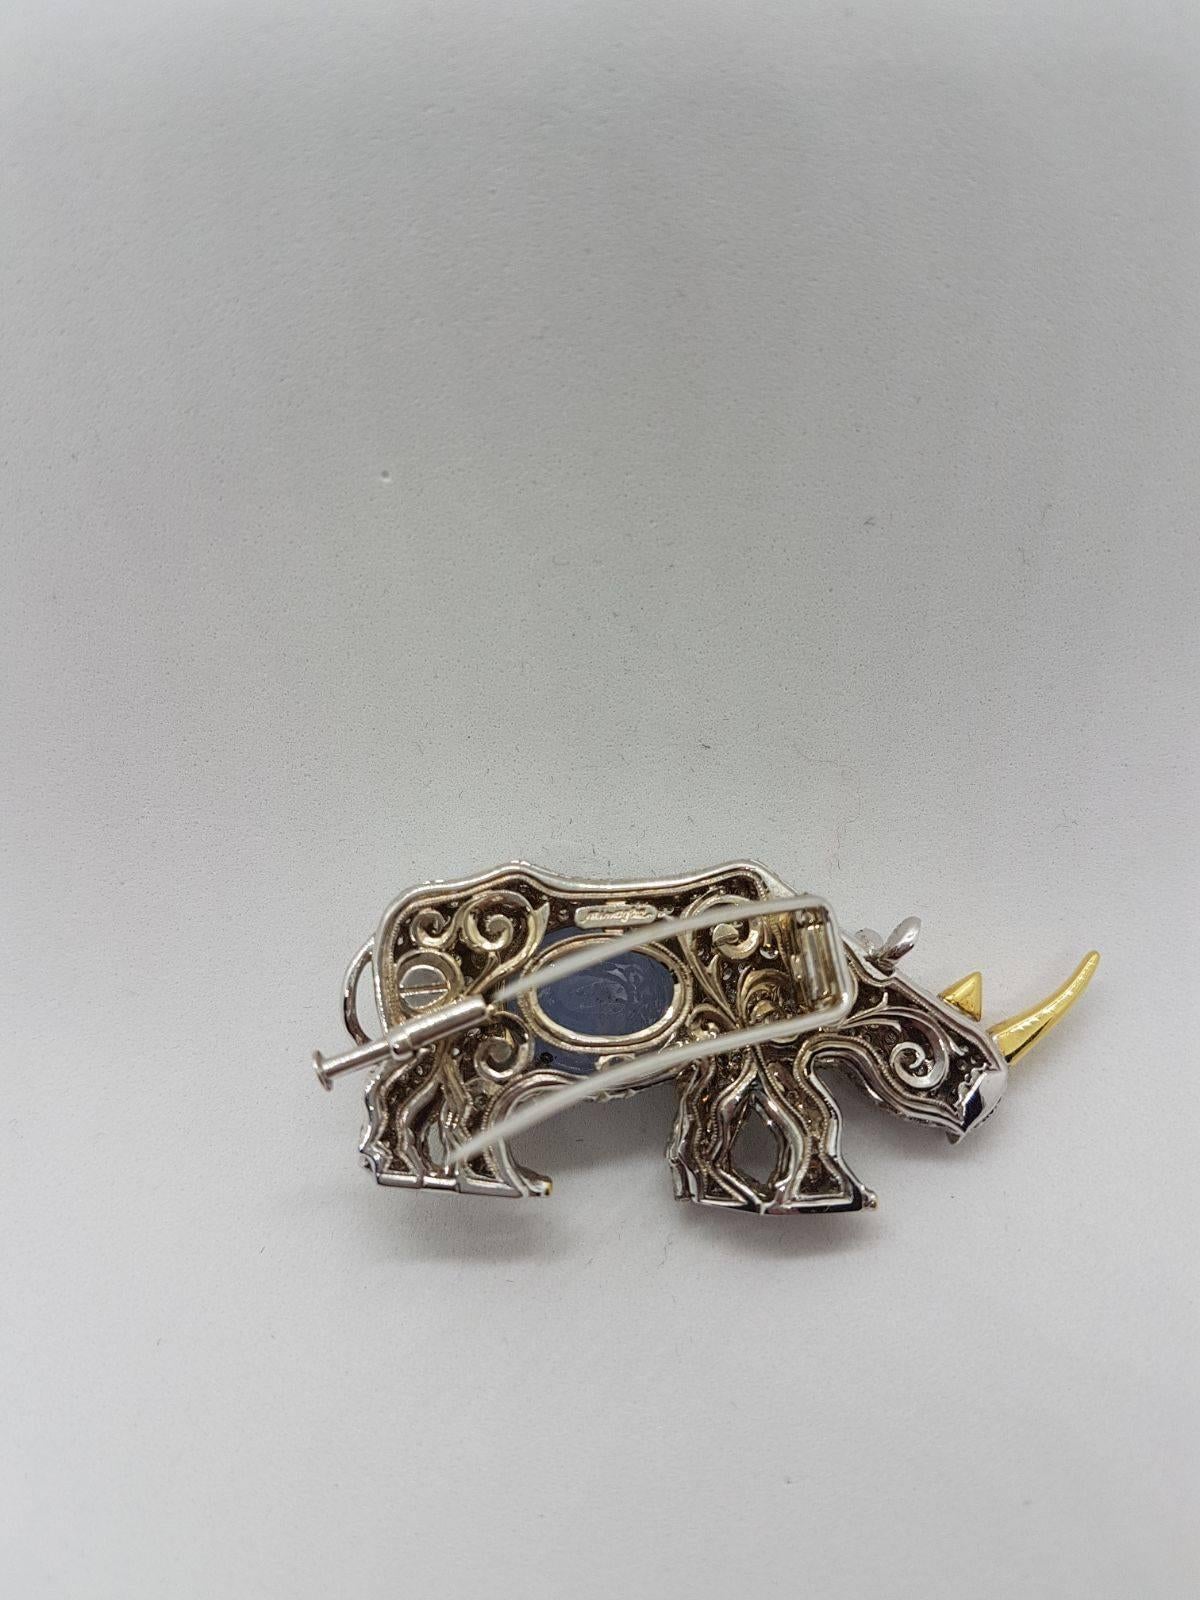 Rhinoceros Broach in White and Yellow Gold with Diamonds and a Sapphire Cabochon For Sale 2